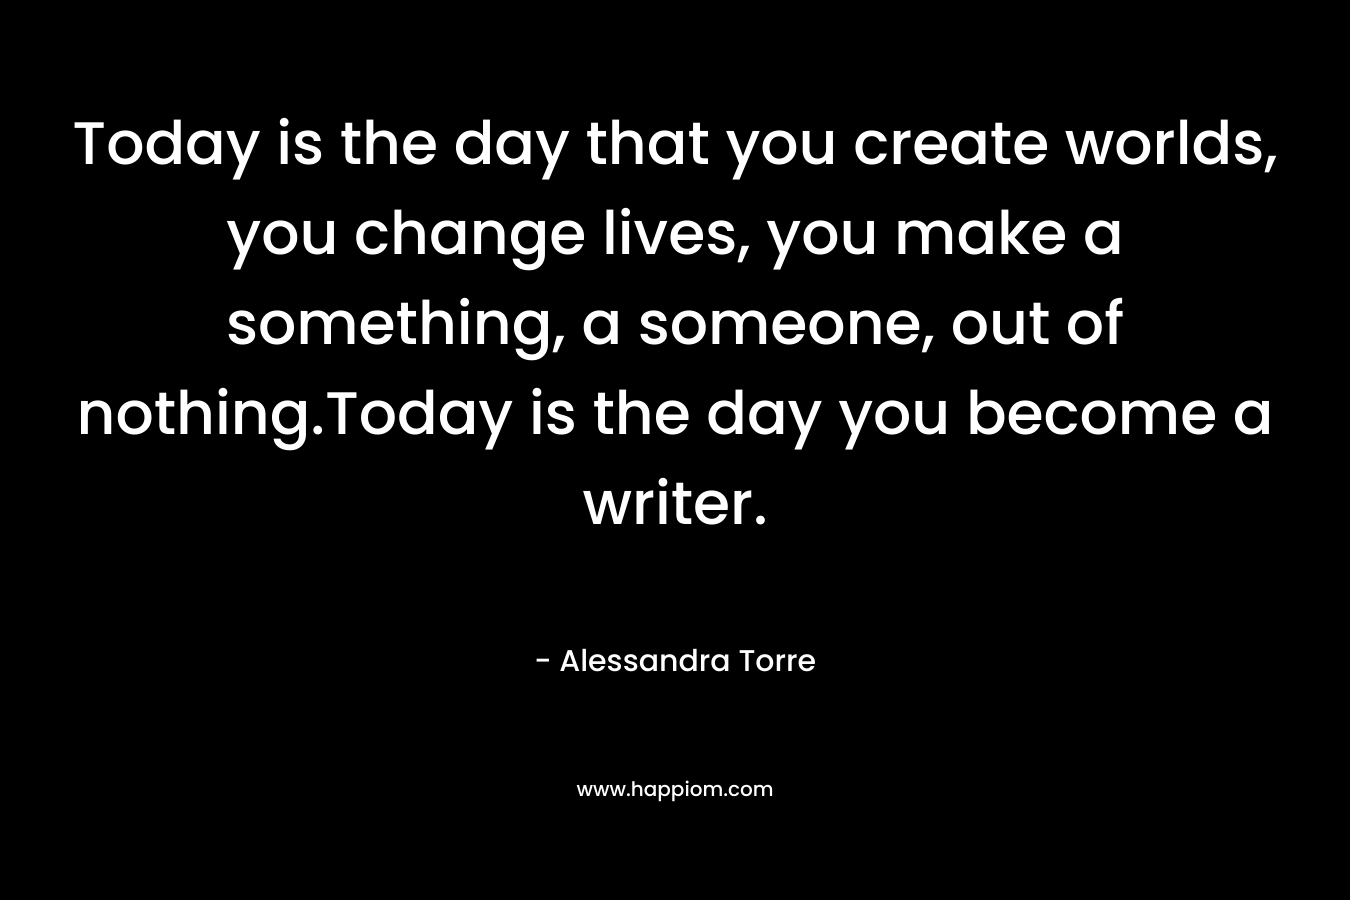 Today is the day that you create worlds, you change lives, you make a something, a someone, out of nothing.Today is the day you become a writer. – Alessandra Torre